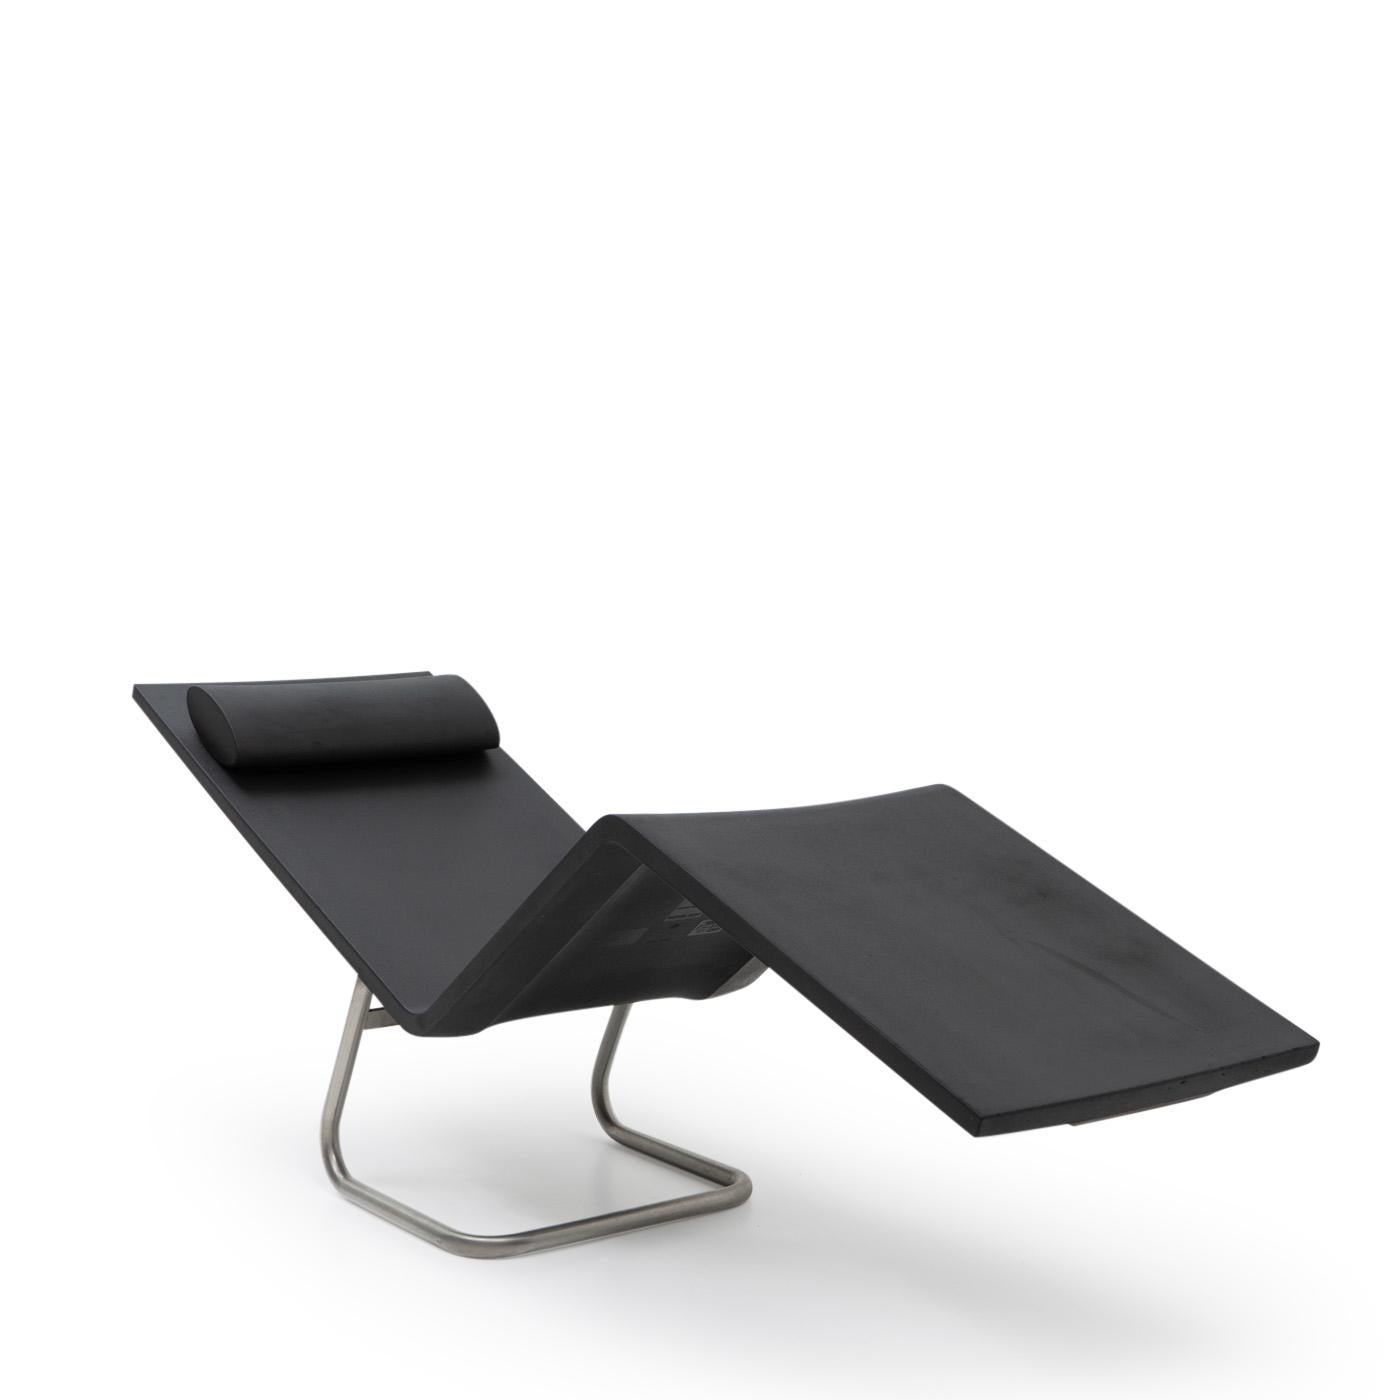 Lounge Chair by Maarten van Severen for Vitra ( 2000):

These comfortable lounge chairs can be easily (and safely) tilted back by shifting your body weight, thus creating a lounge bed. Note that this edition is suitable for outdoor use, as it does